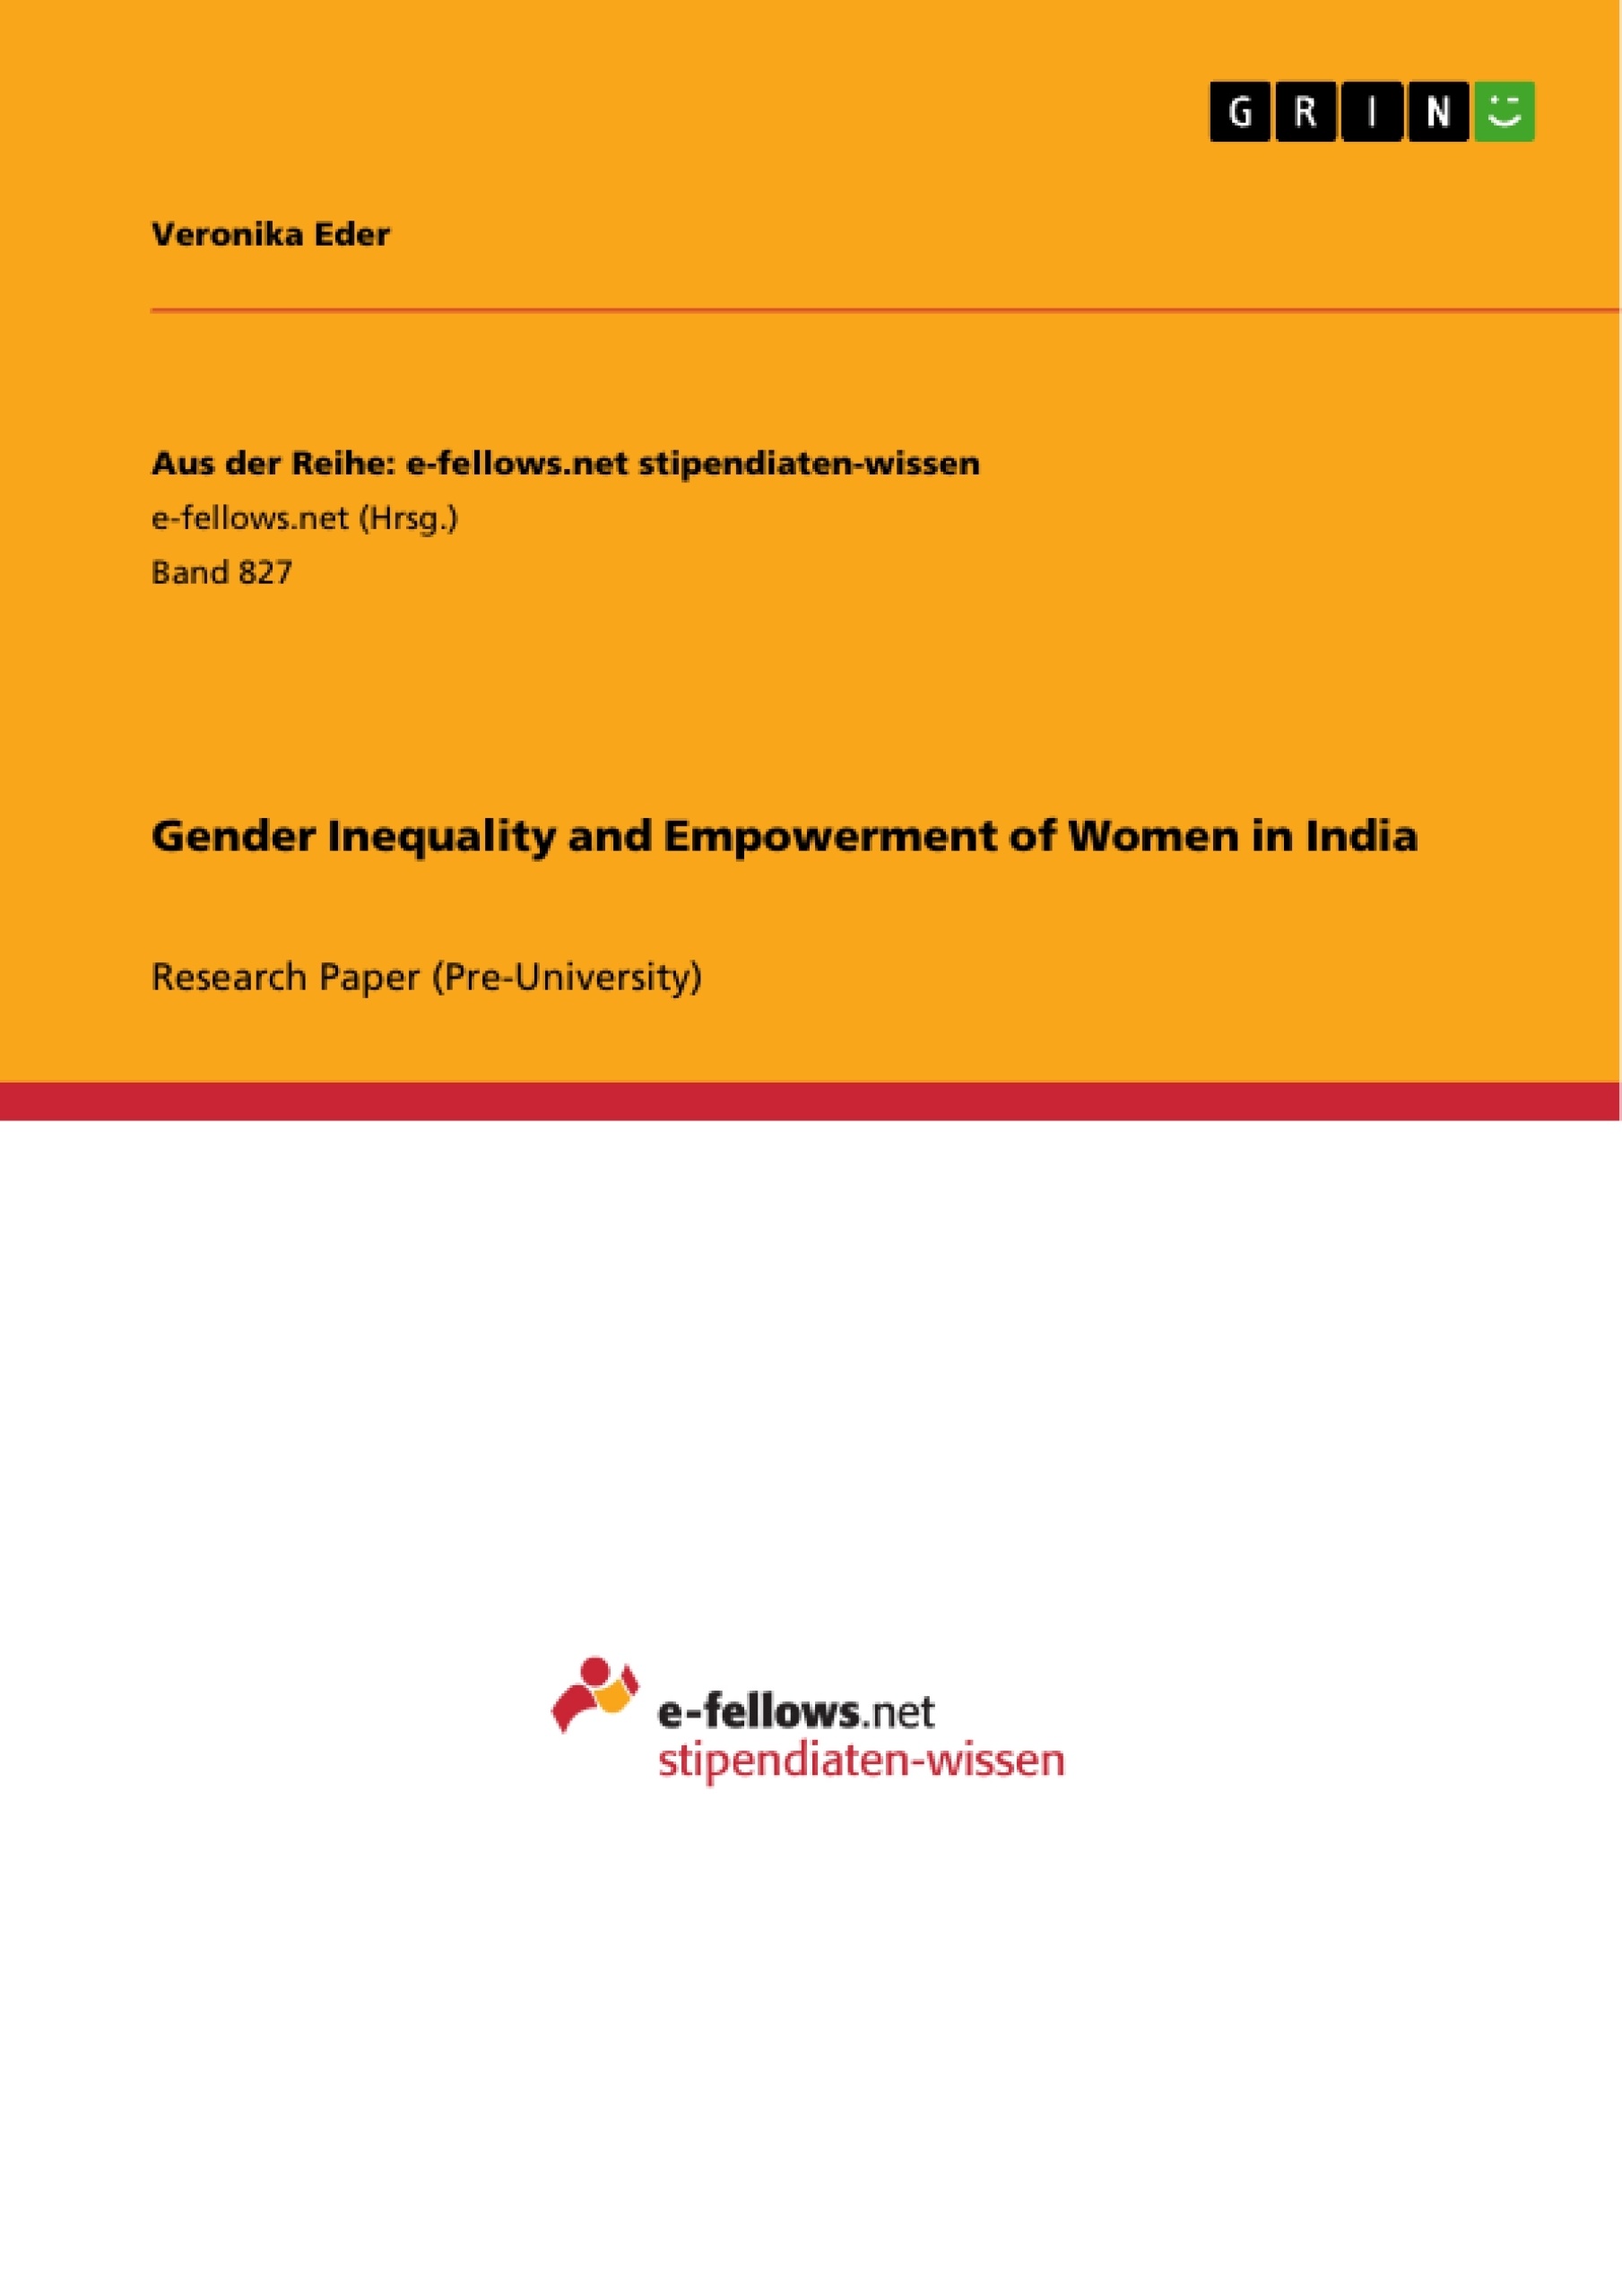 Title: Gender Inequality and Empowerment of Women in India